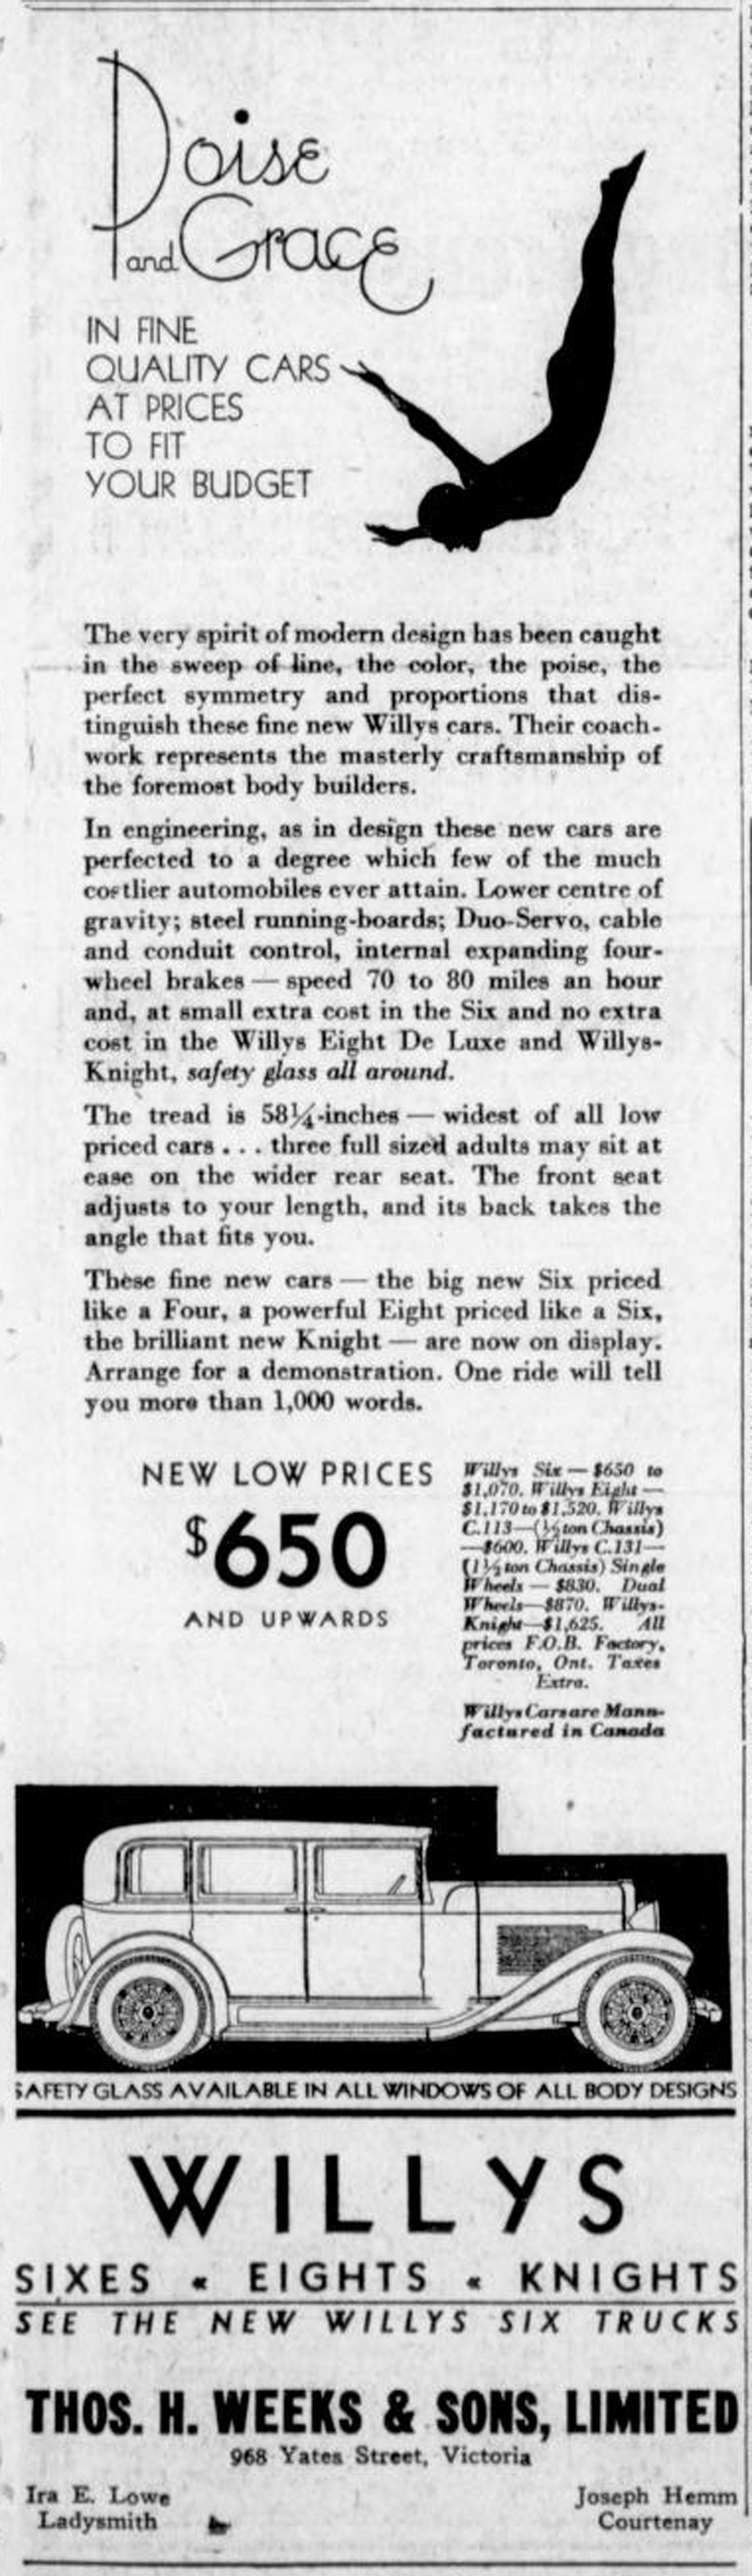 1931 advertisement for Willys cars and trucks by the Victoria Willys dealer, Thomas H. Weeks & Sons Ltd., 968 Yates Street (West Coast Driver Training collection)